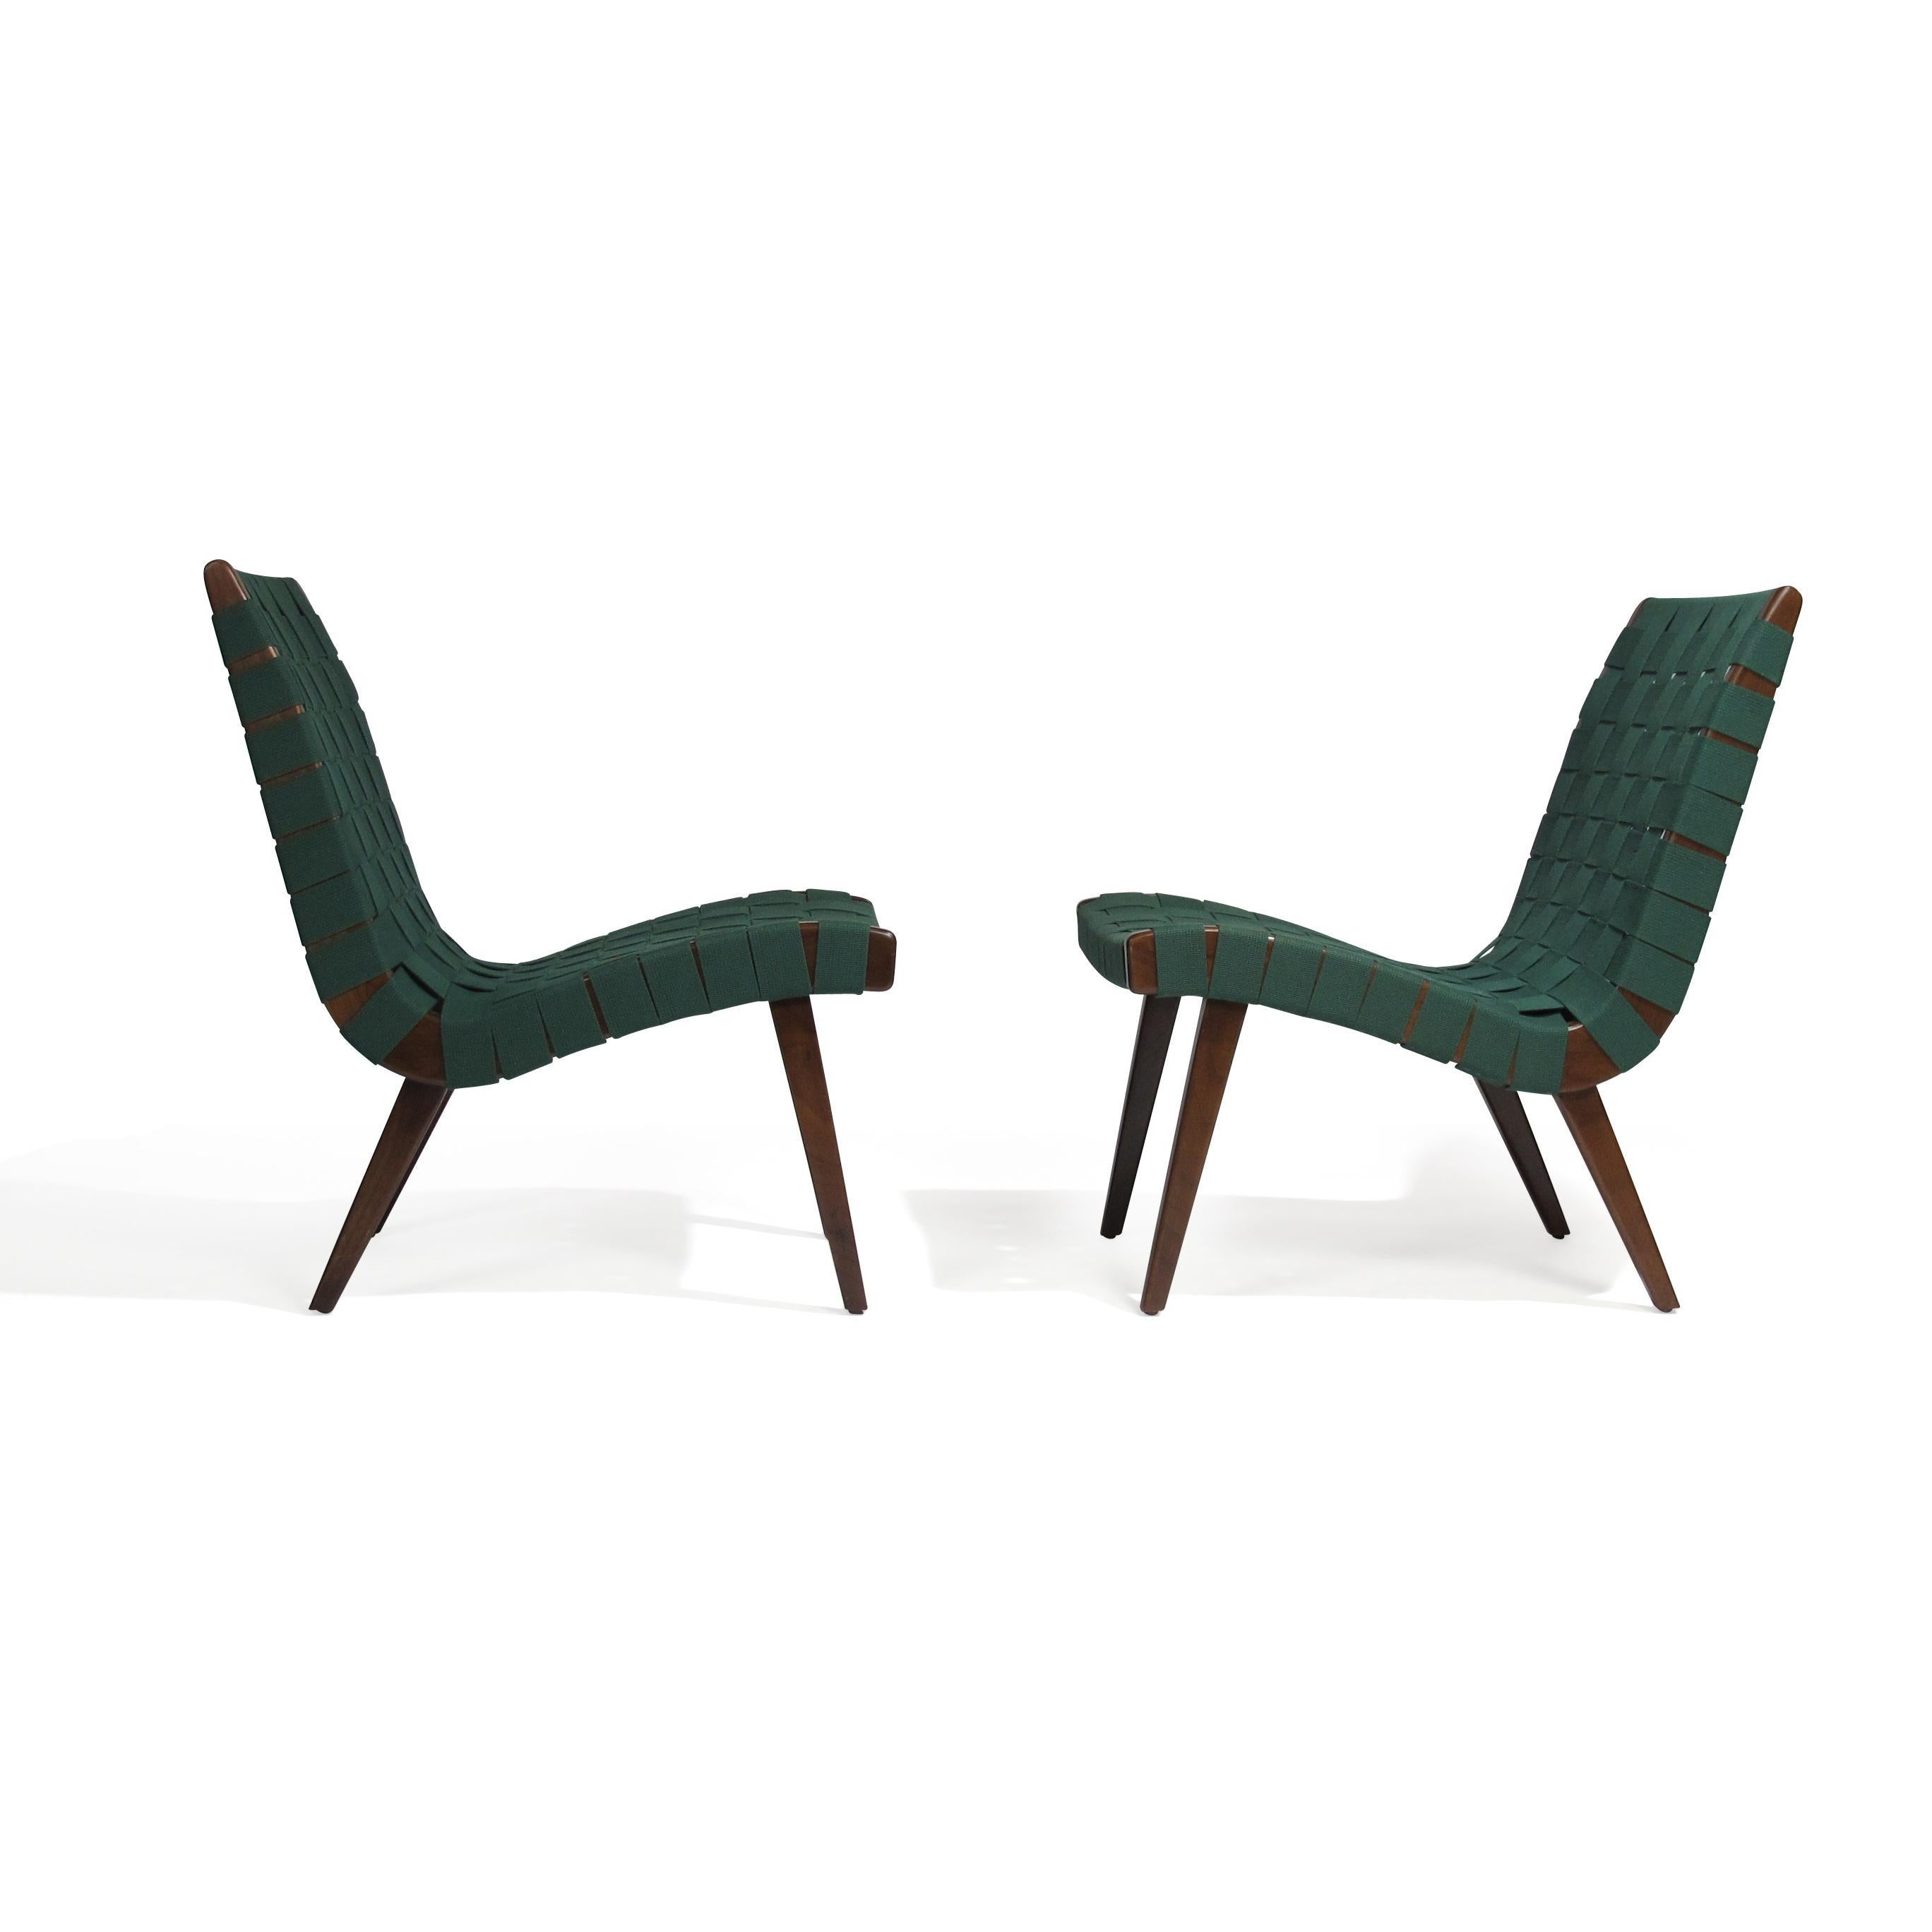 American Jens Risom for Knoll Studio Lounge Chairs